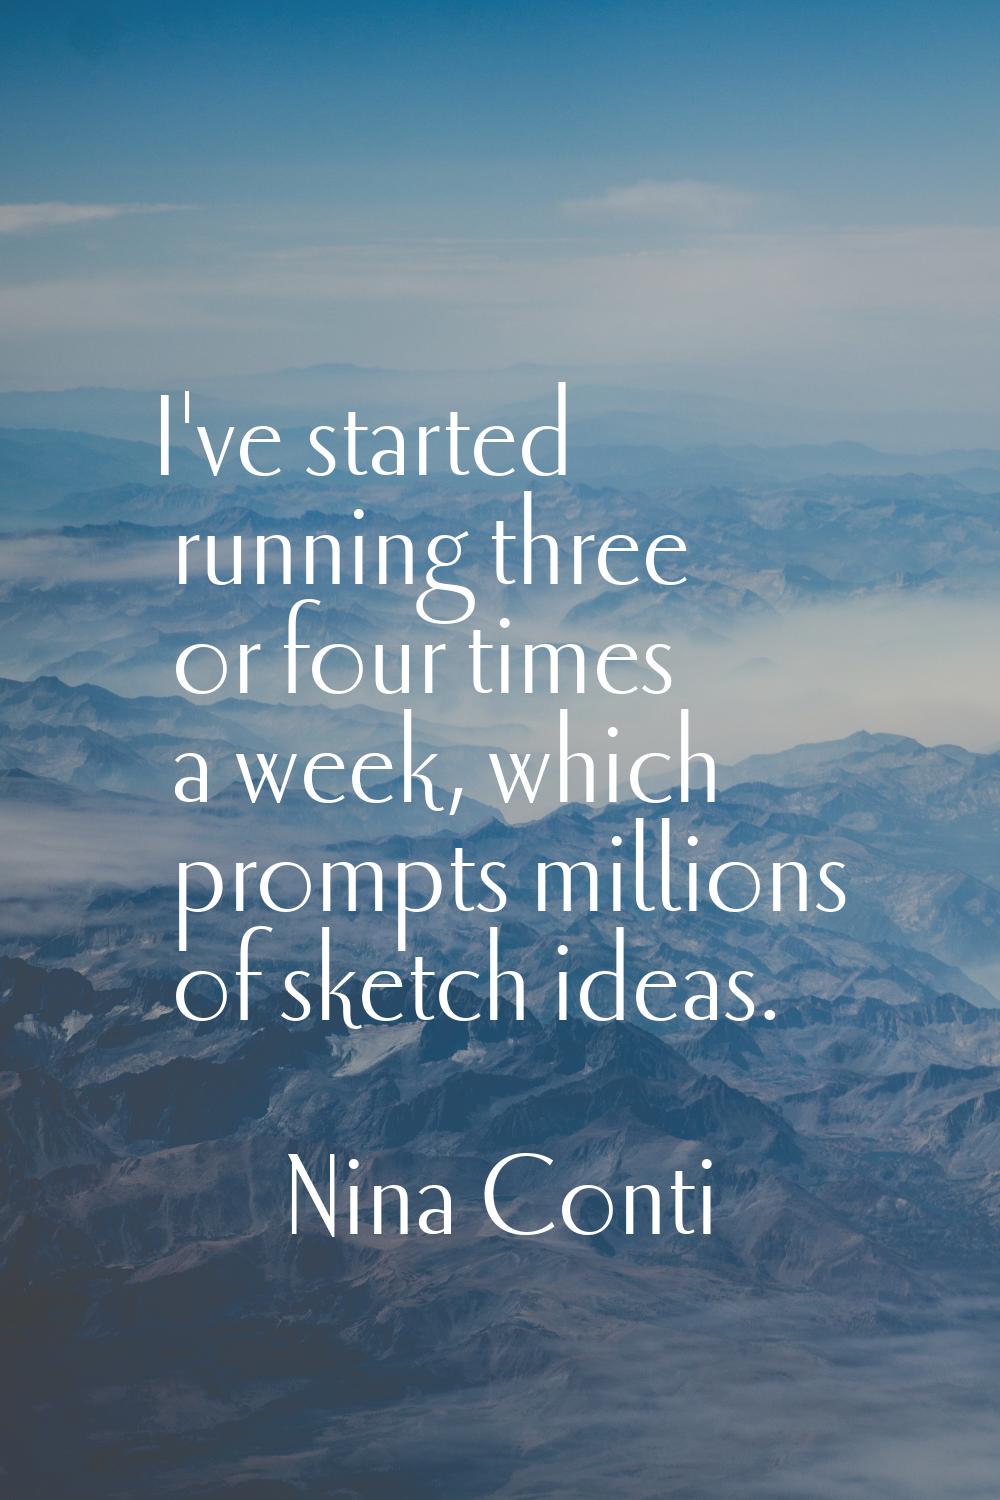 I've started running three or four times a week, which prompts millions of sketch ideas.